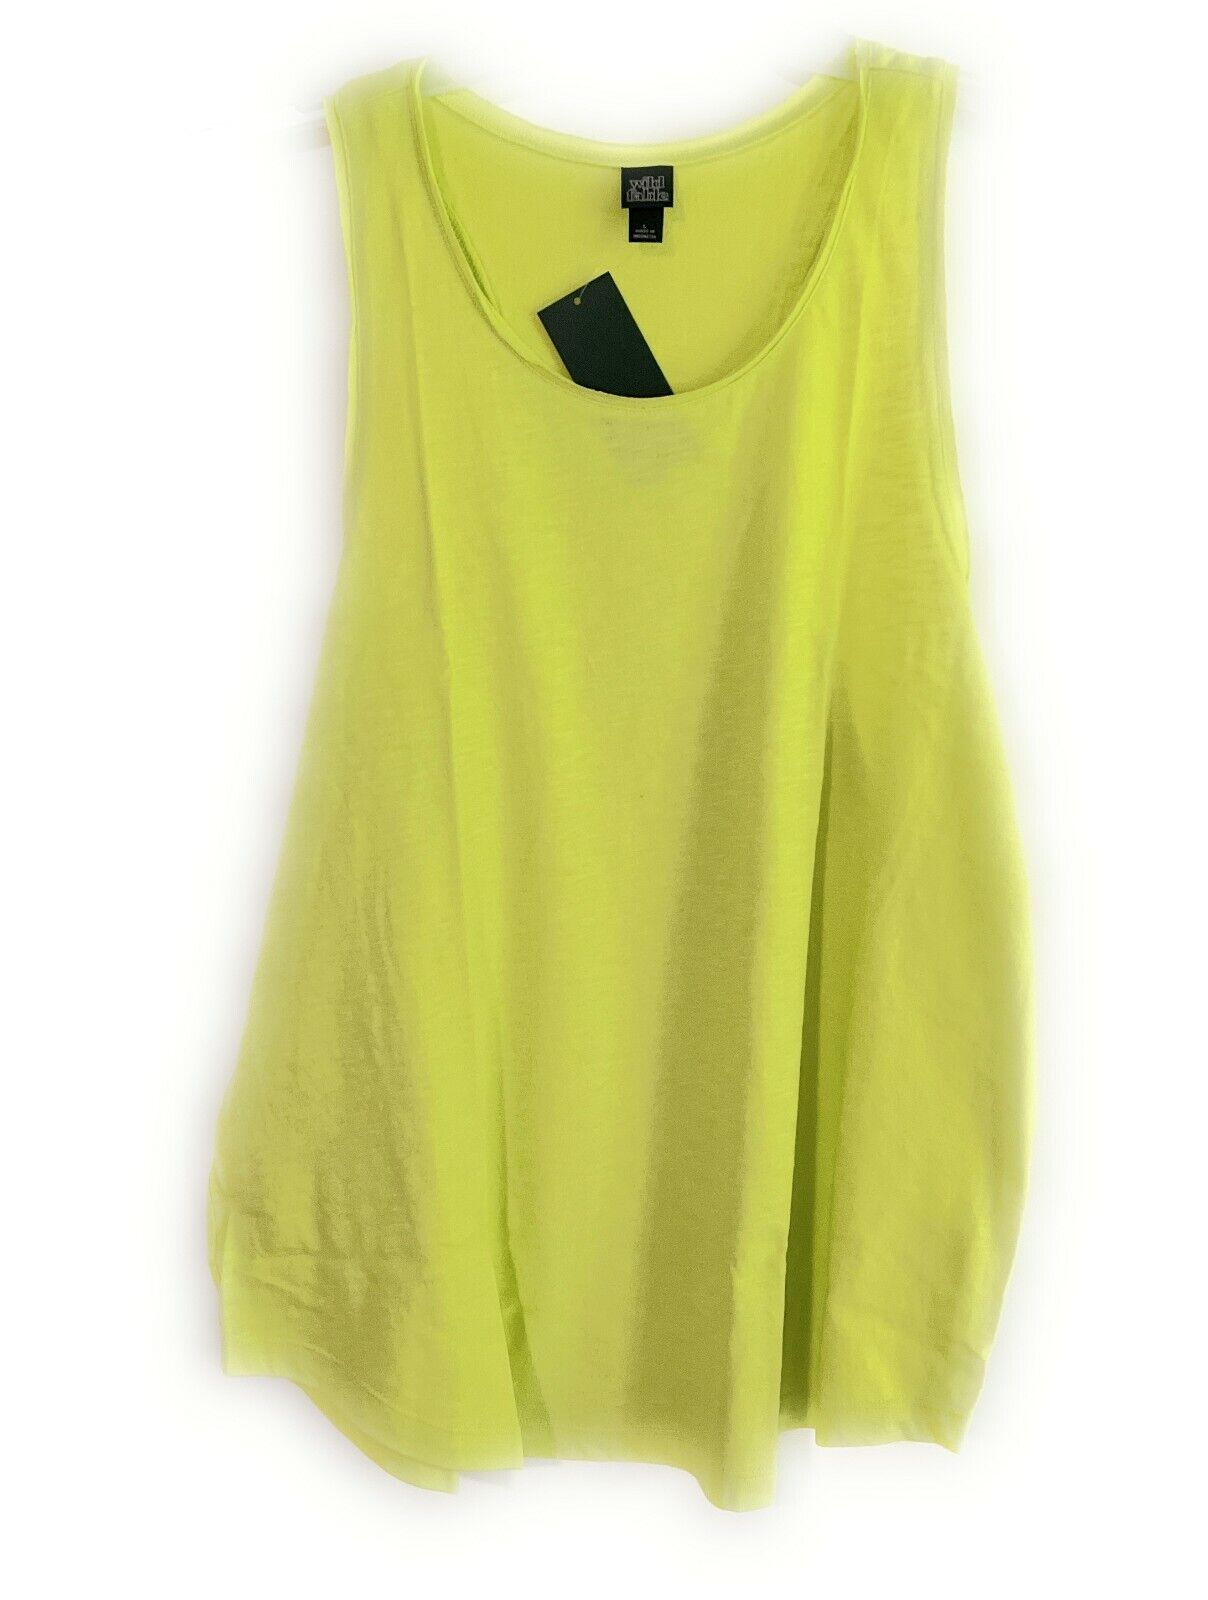 Women's Size Large Relaxed Fit Tank Top Racerback- Wild Fable Citron Green NEW